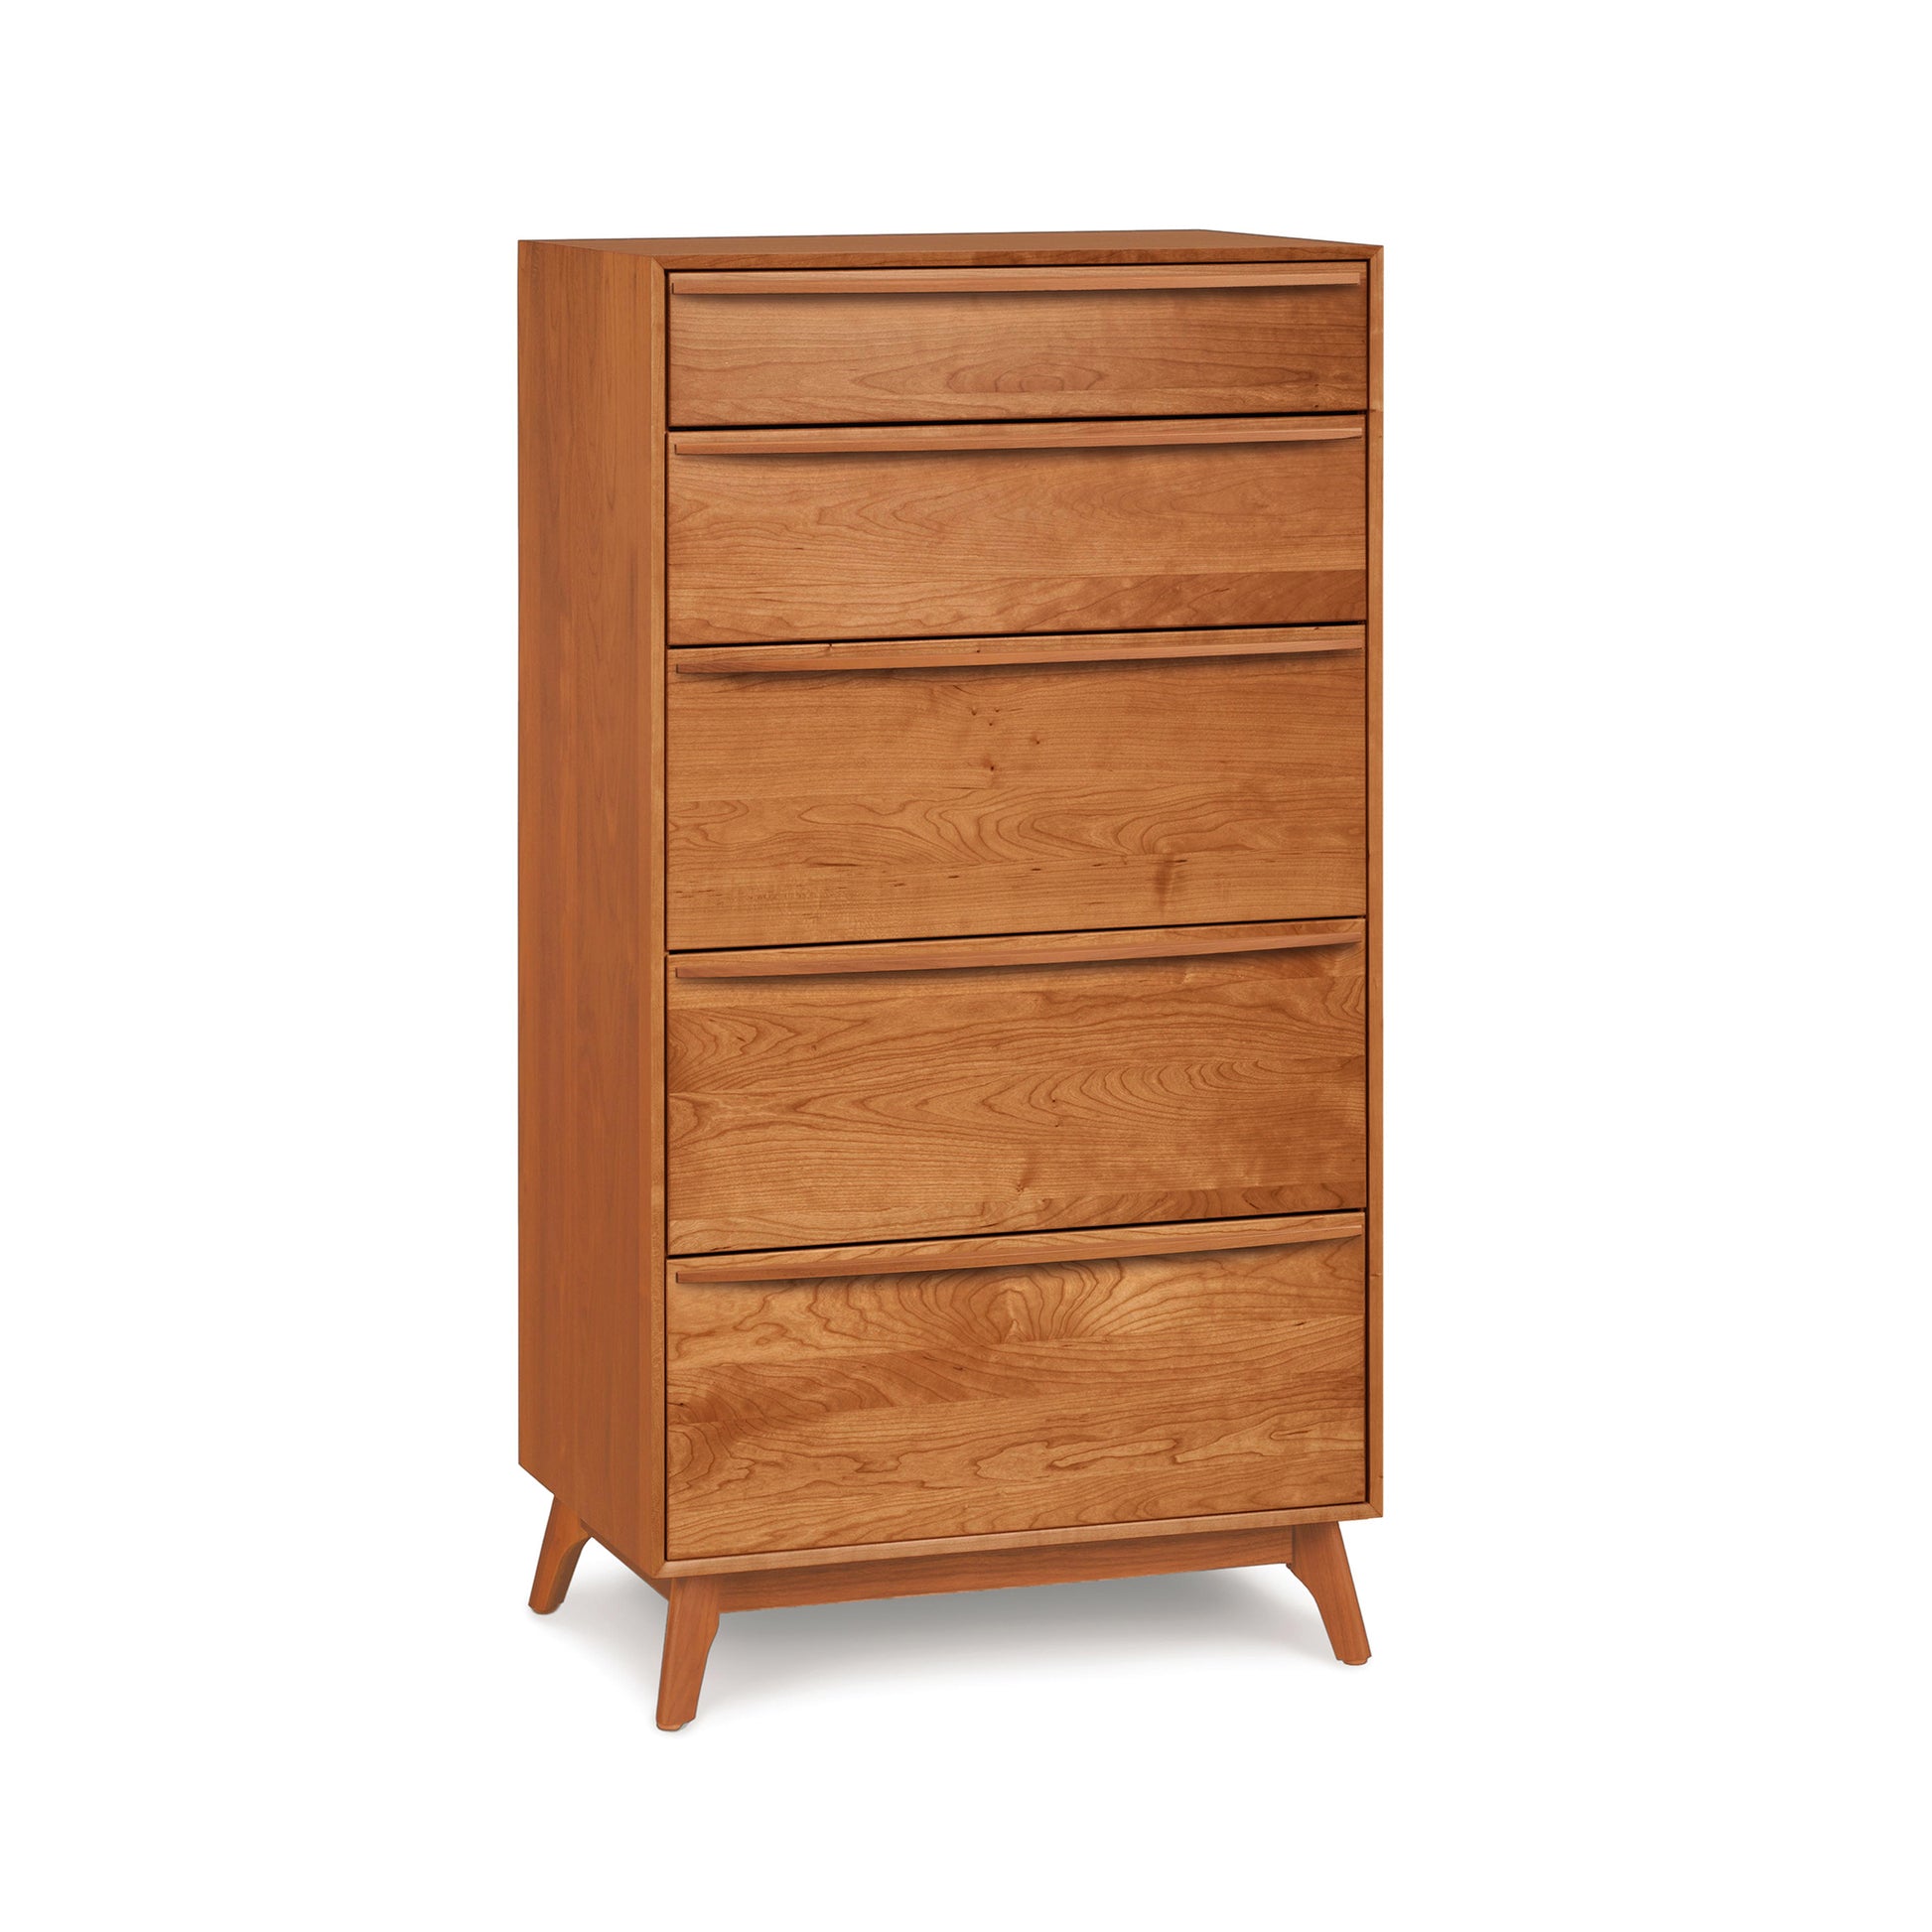 A Catalina 5-Drawer Chest from Copeland Furniture, standing on angled legs against a white background, showcases solid wood construction.